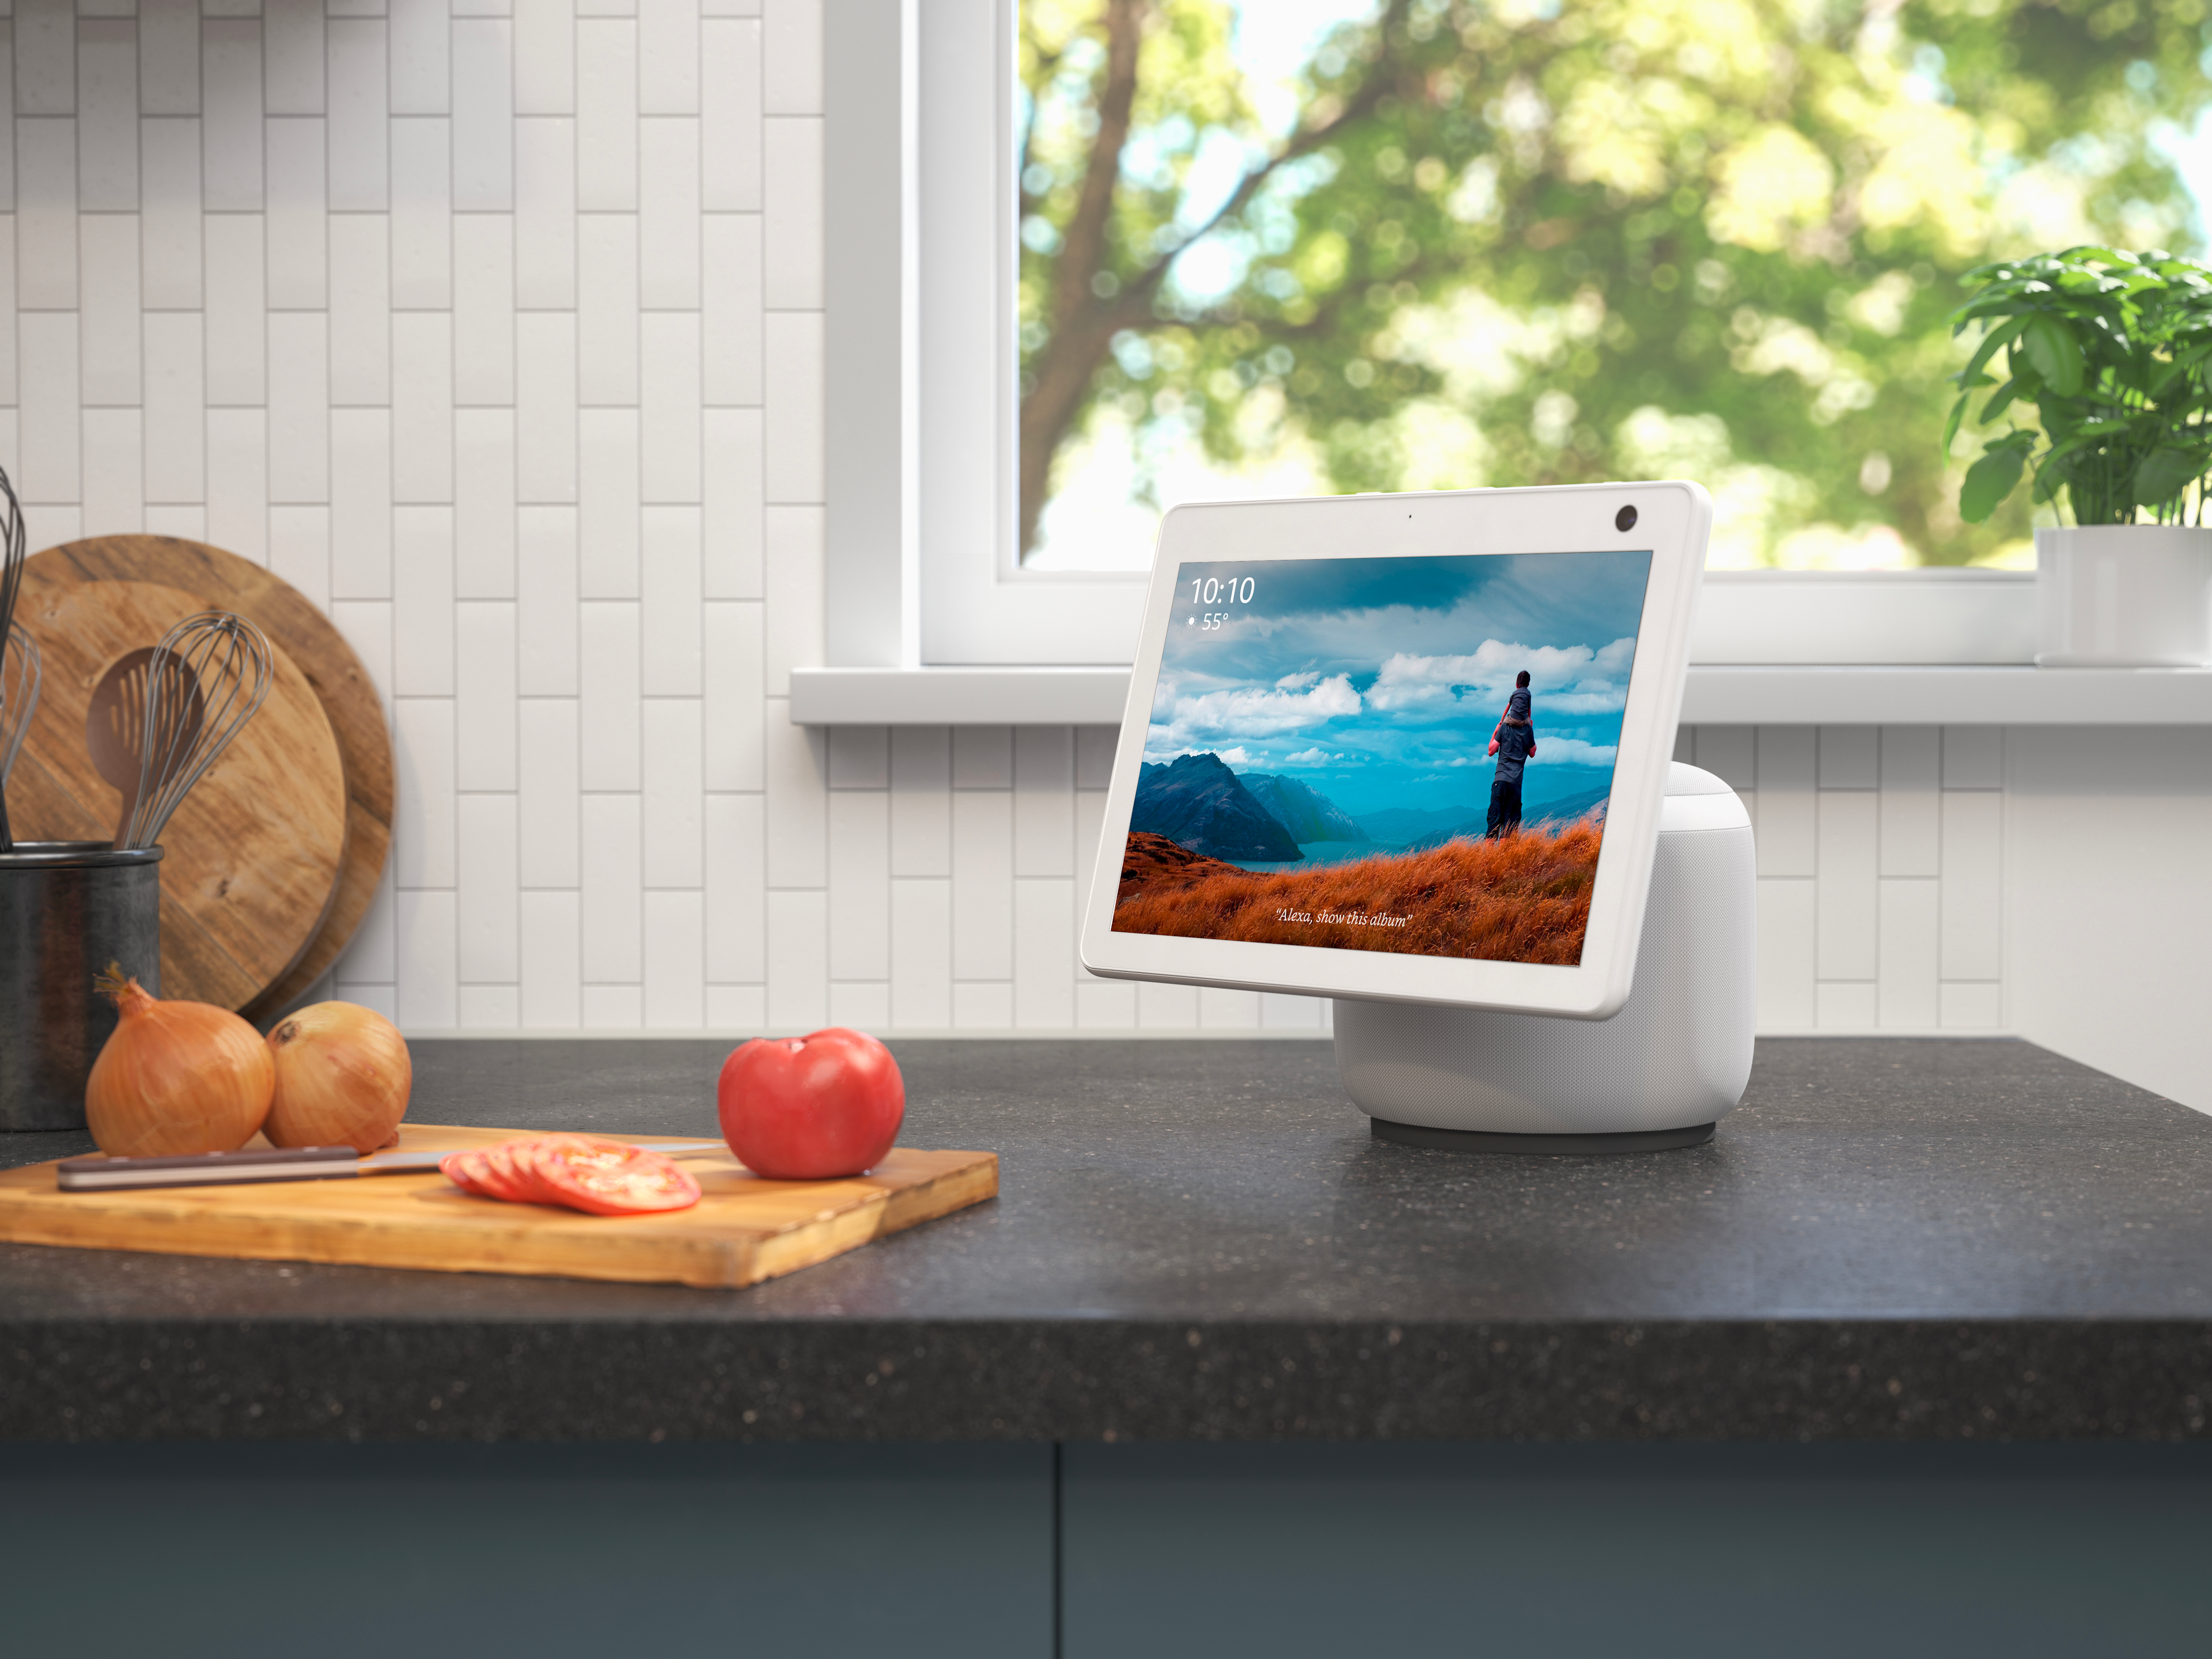 picture of the Echo Show 10 amazon device